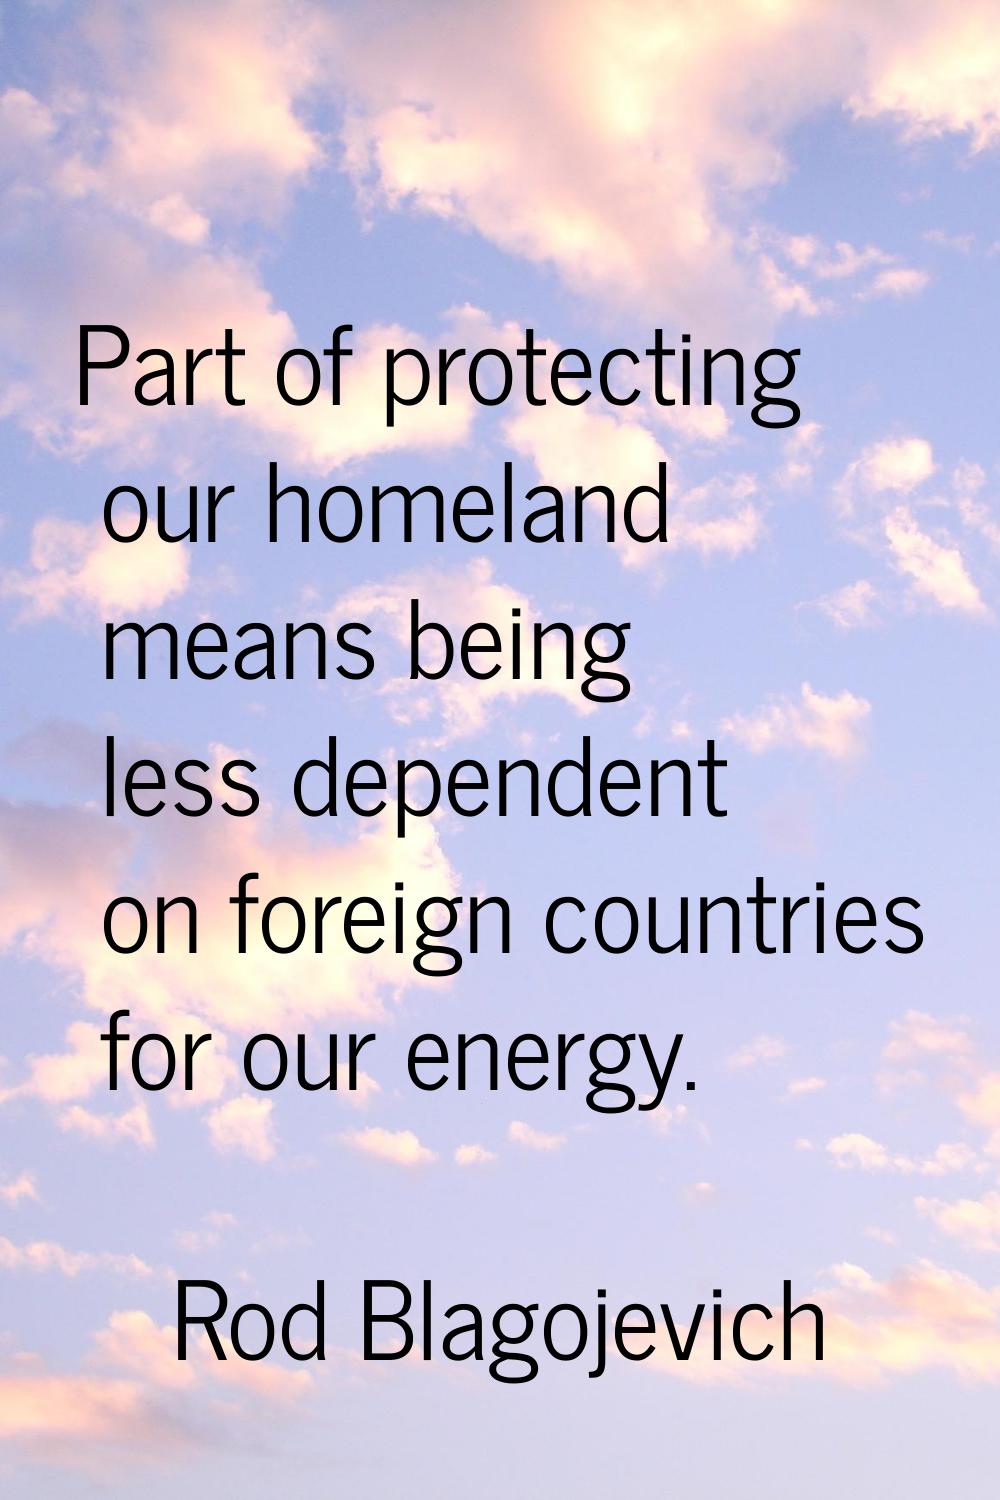 Part of protecting our homeland means being less dependent on foreign countries for our energy.